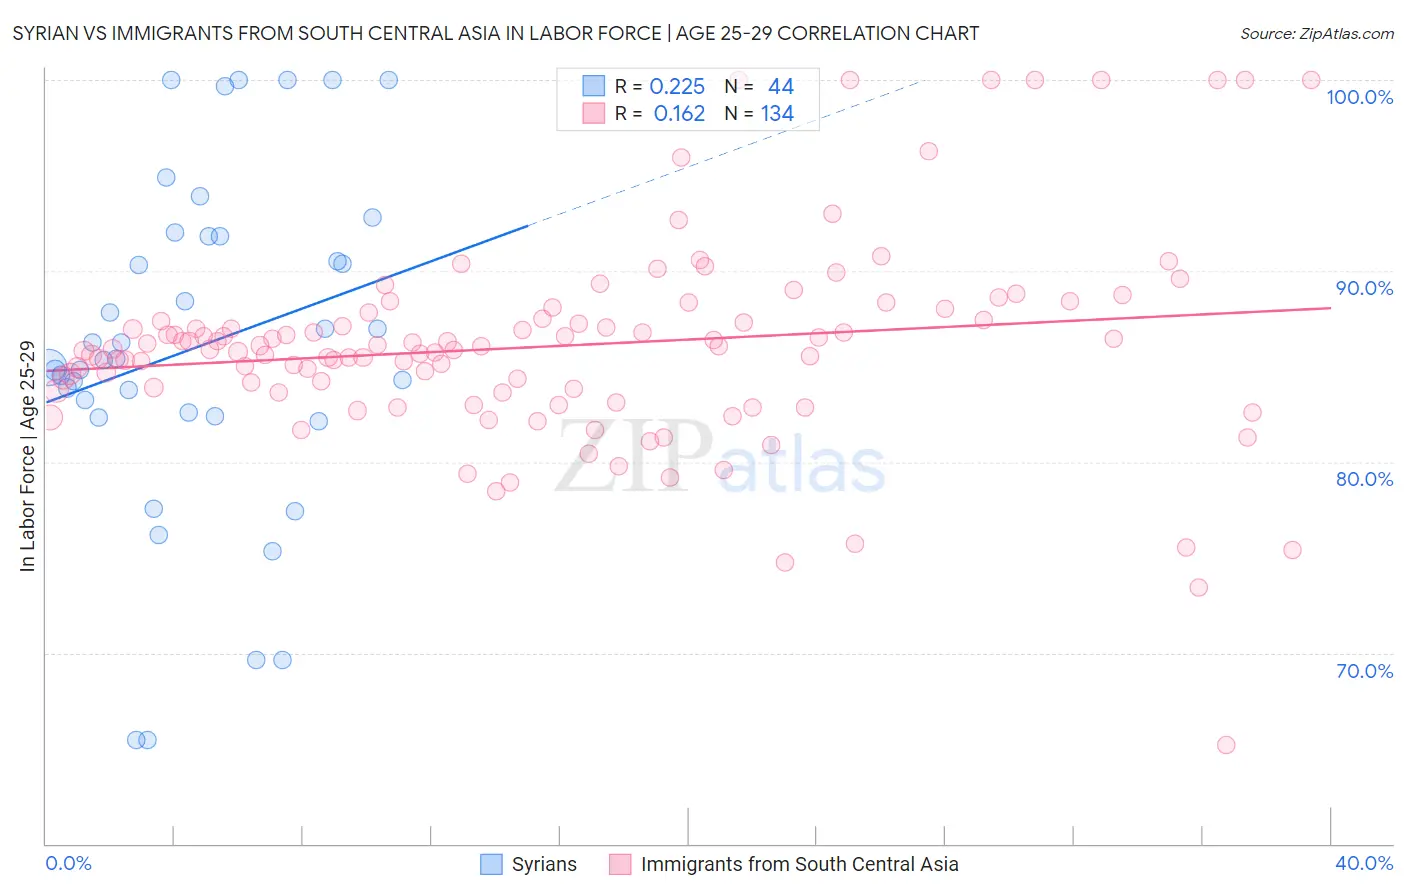 Syrian vs Immigrants from South Central Asia In Labor Force | Age 25-29